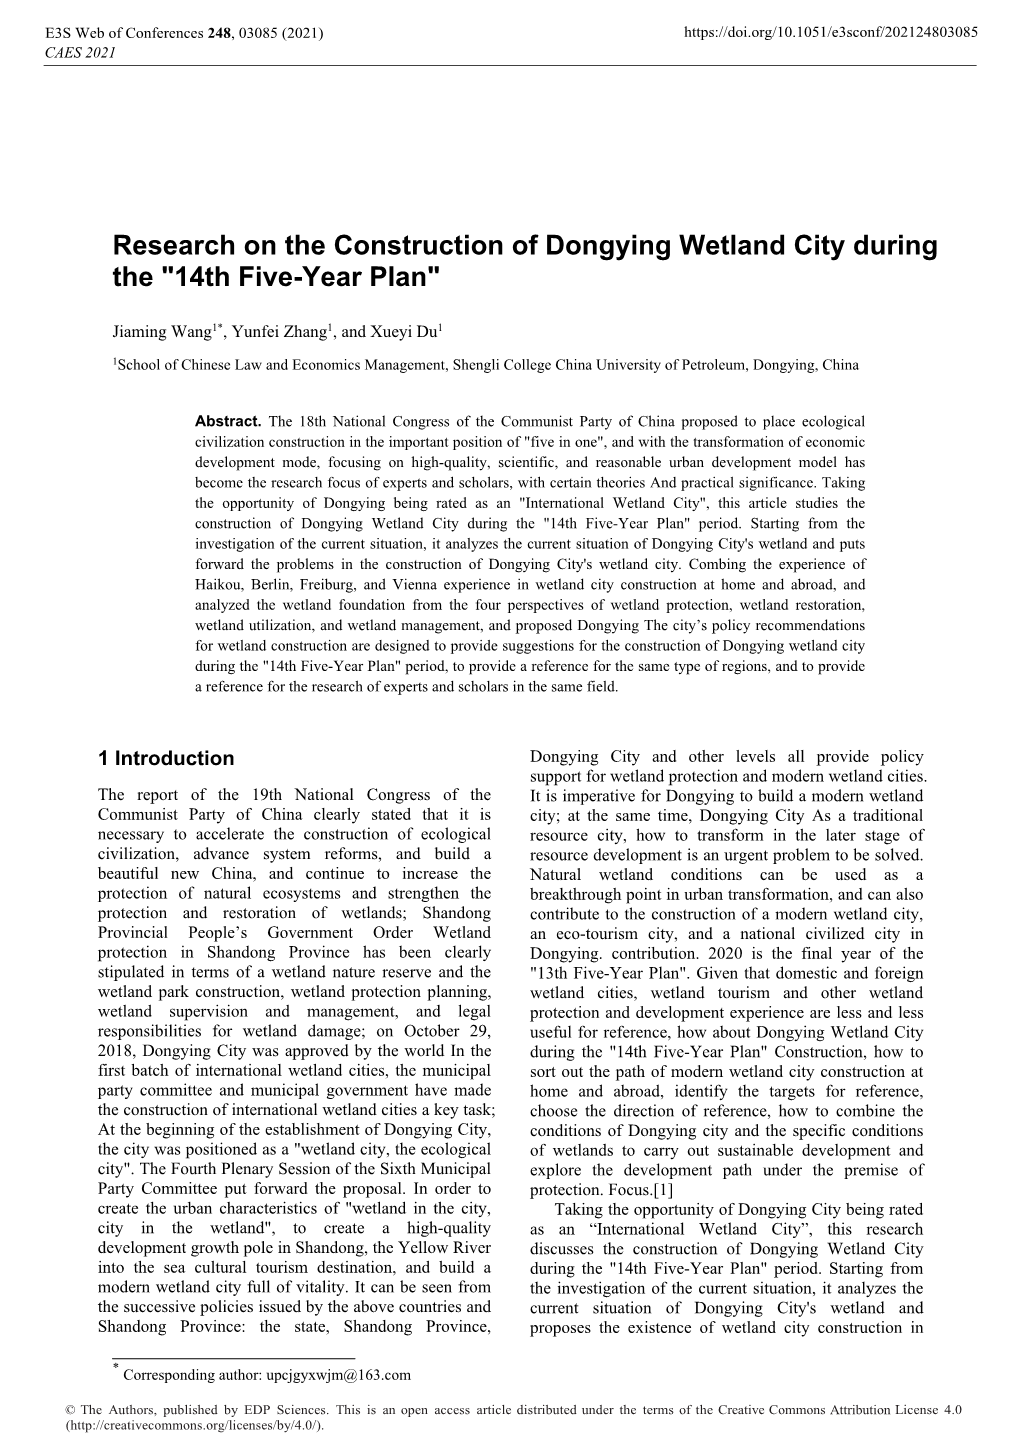 Research on the Construction of Dongying Wetland City During the "14Th Five-Year Plan"